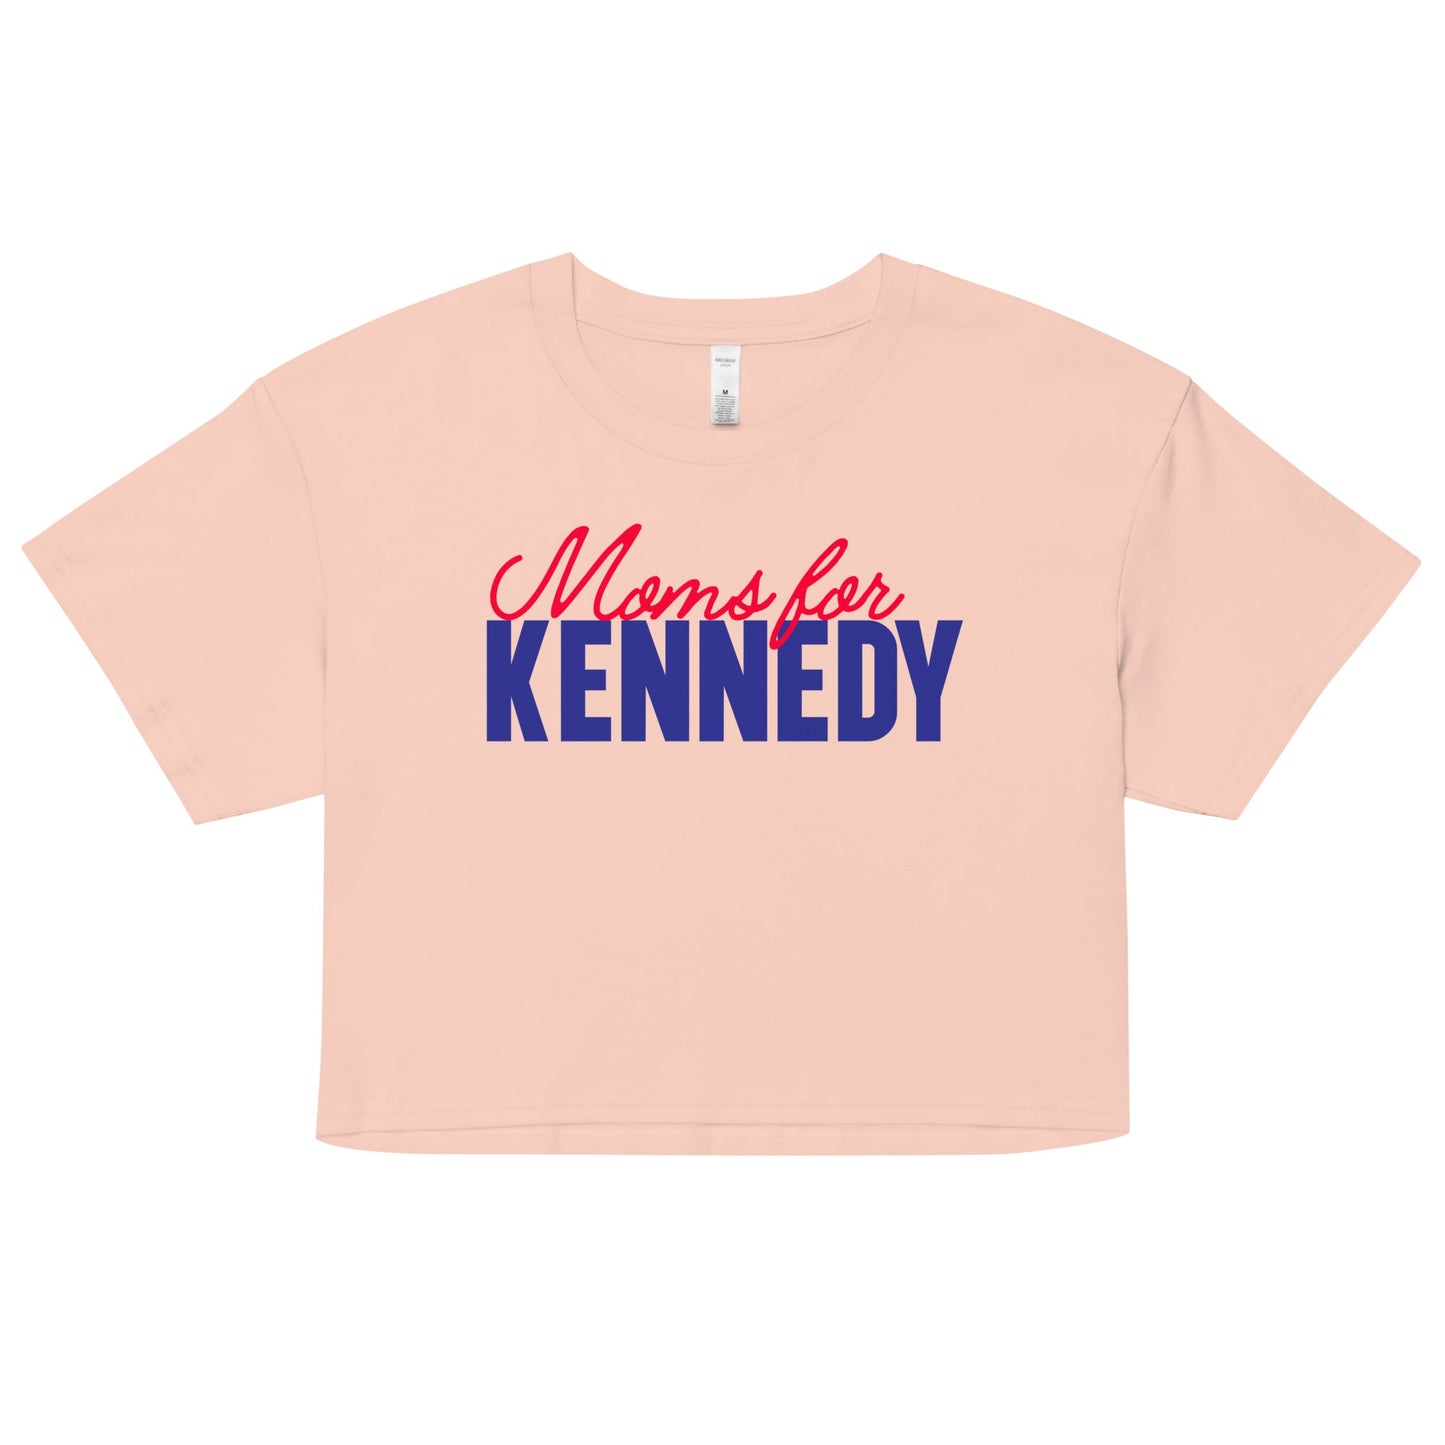 Moms for Kennedy Women’s Crop Top - TEAM KENNEDY. All rights reserved